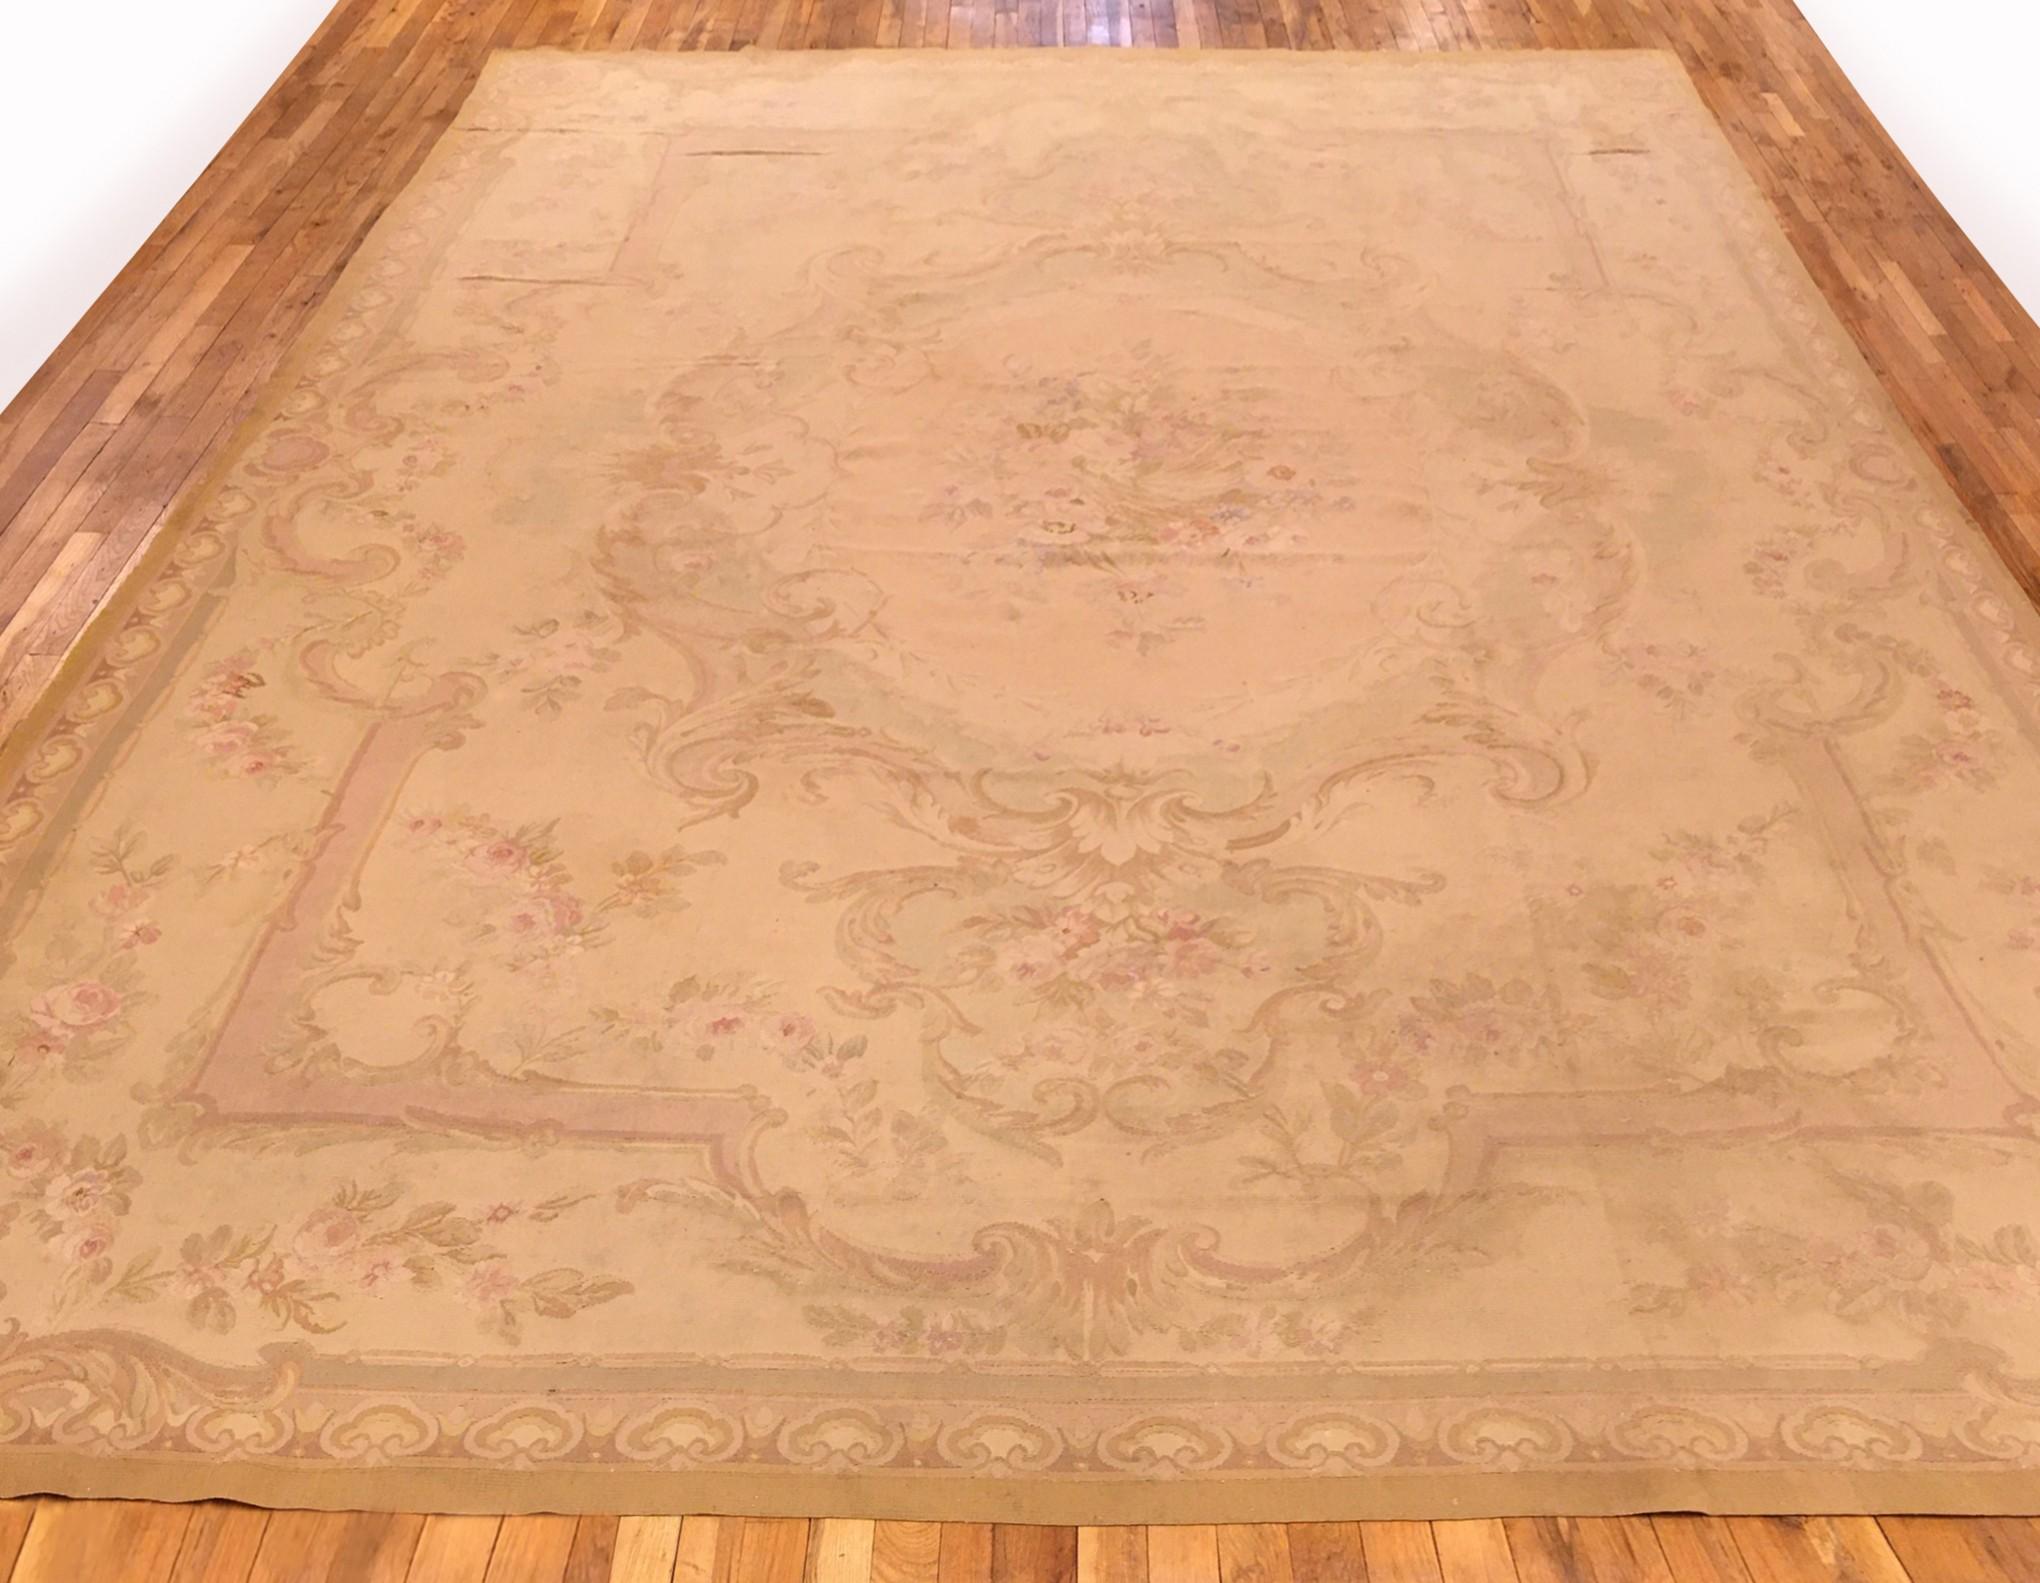 An antique French Aubusson carpet, size 14'0 x 9'10, circa 1890. This fine Louis Philippe era flat-woven wool carpet features an elegant medallion and a delicately crafted outer border, with soft, muted ivory colors throughout. Hand-woven with wool.